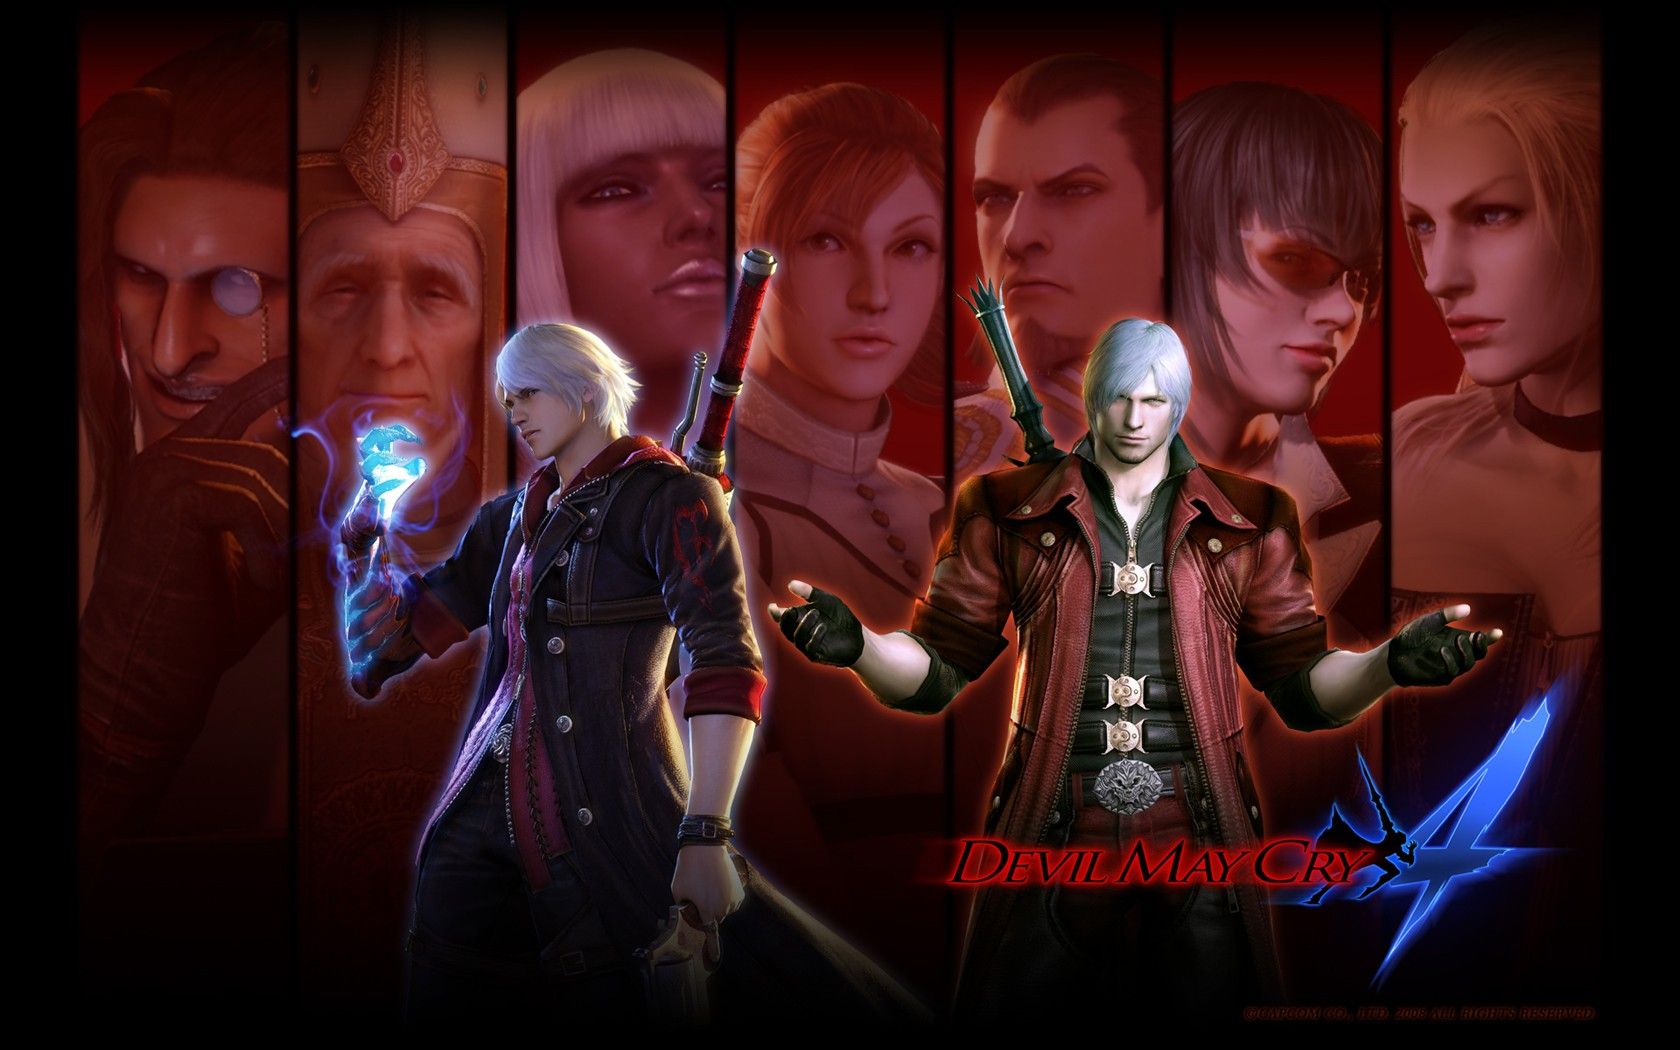 Xbox360 game - Devil may cry 4 HQ wallpapers 1680x1050 NO.10